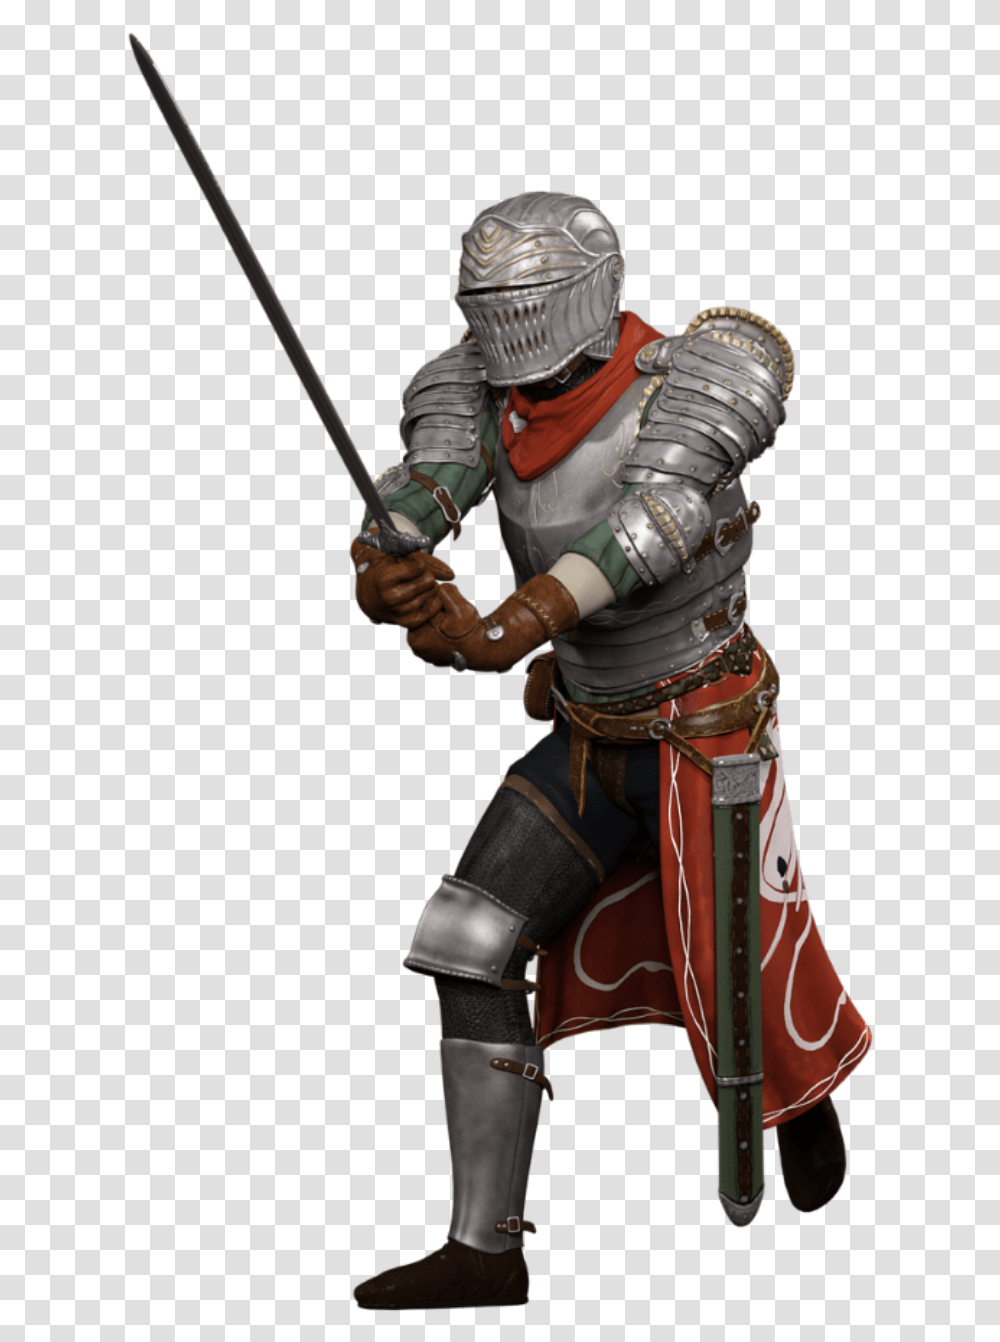 Man Knight Fighter Sword Courageous Clothing Knight With Sword, Helmet, Person, Armor, Samurai Transparent Png